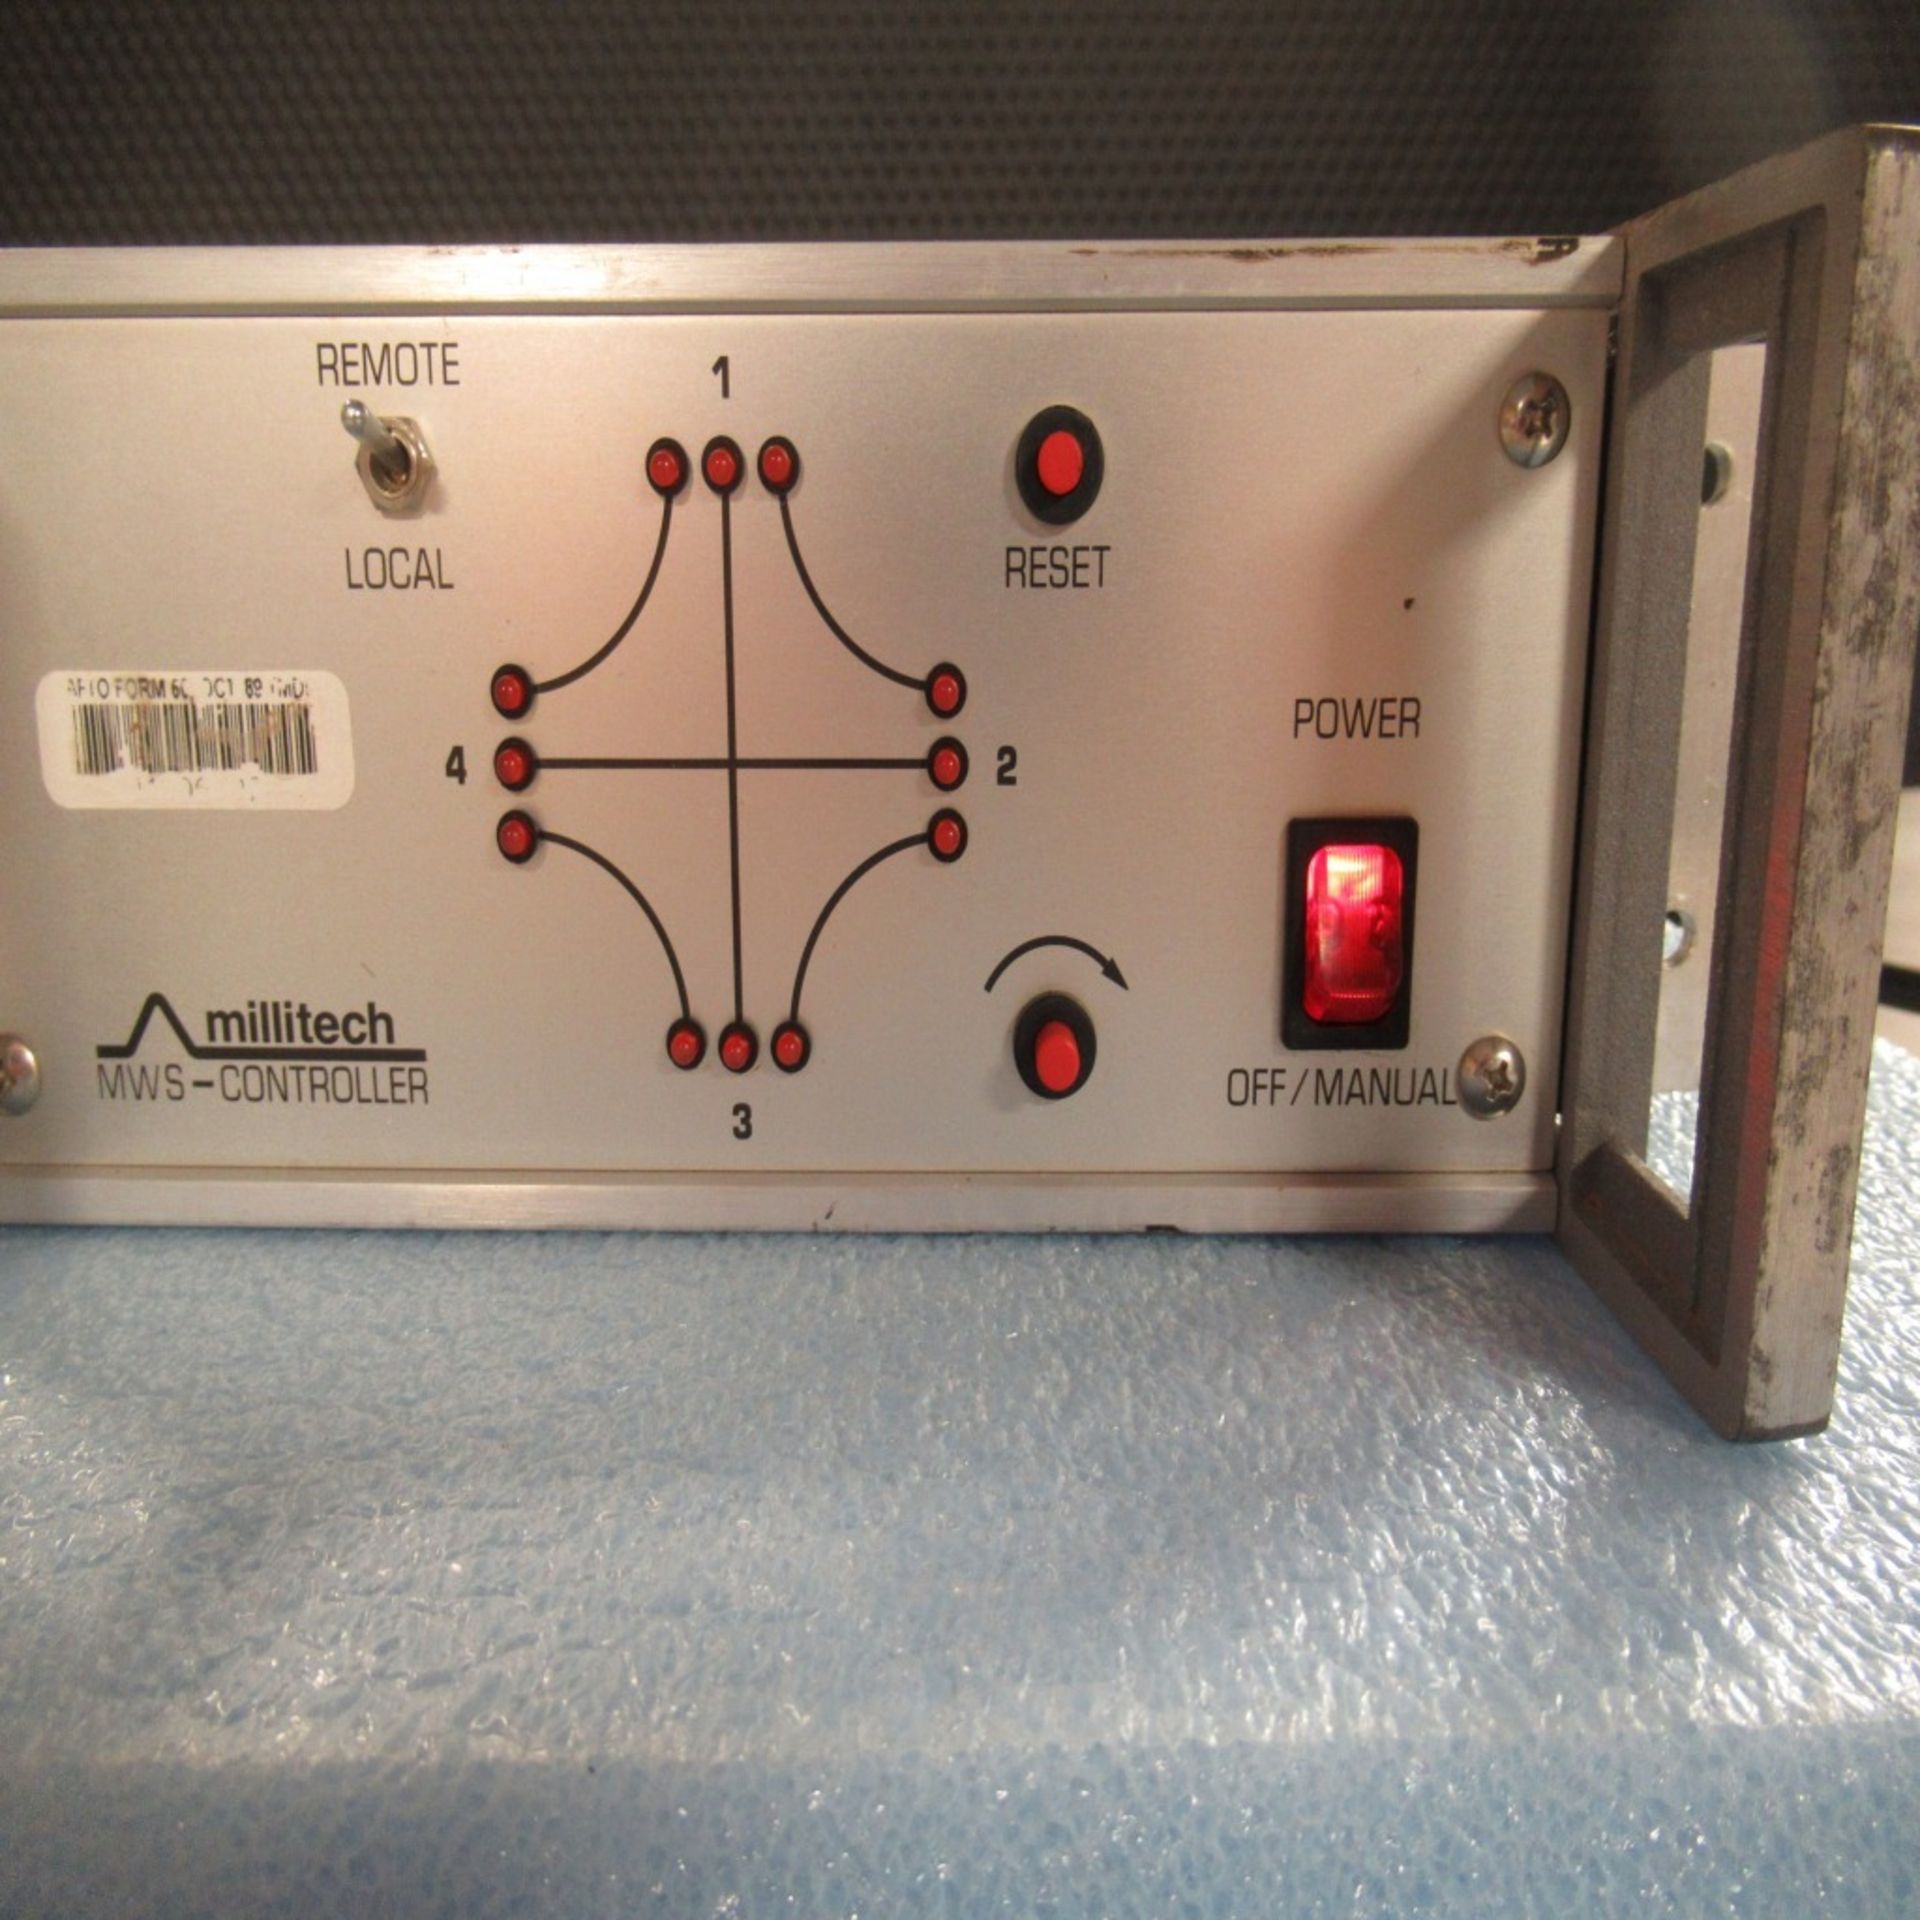 PHOTON SNAP SHOT MODEL 6000 *POWERS ON* NO SCREEN DISPLAY; FARNELL AP20-80 REGULATED POWER SUPPLY * - Image 48 of 222